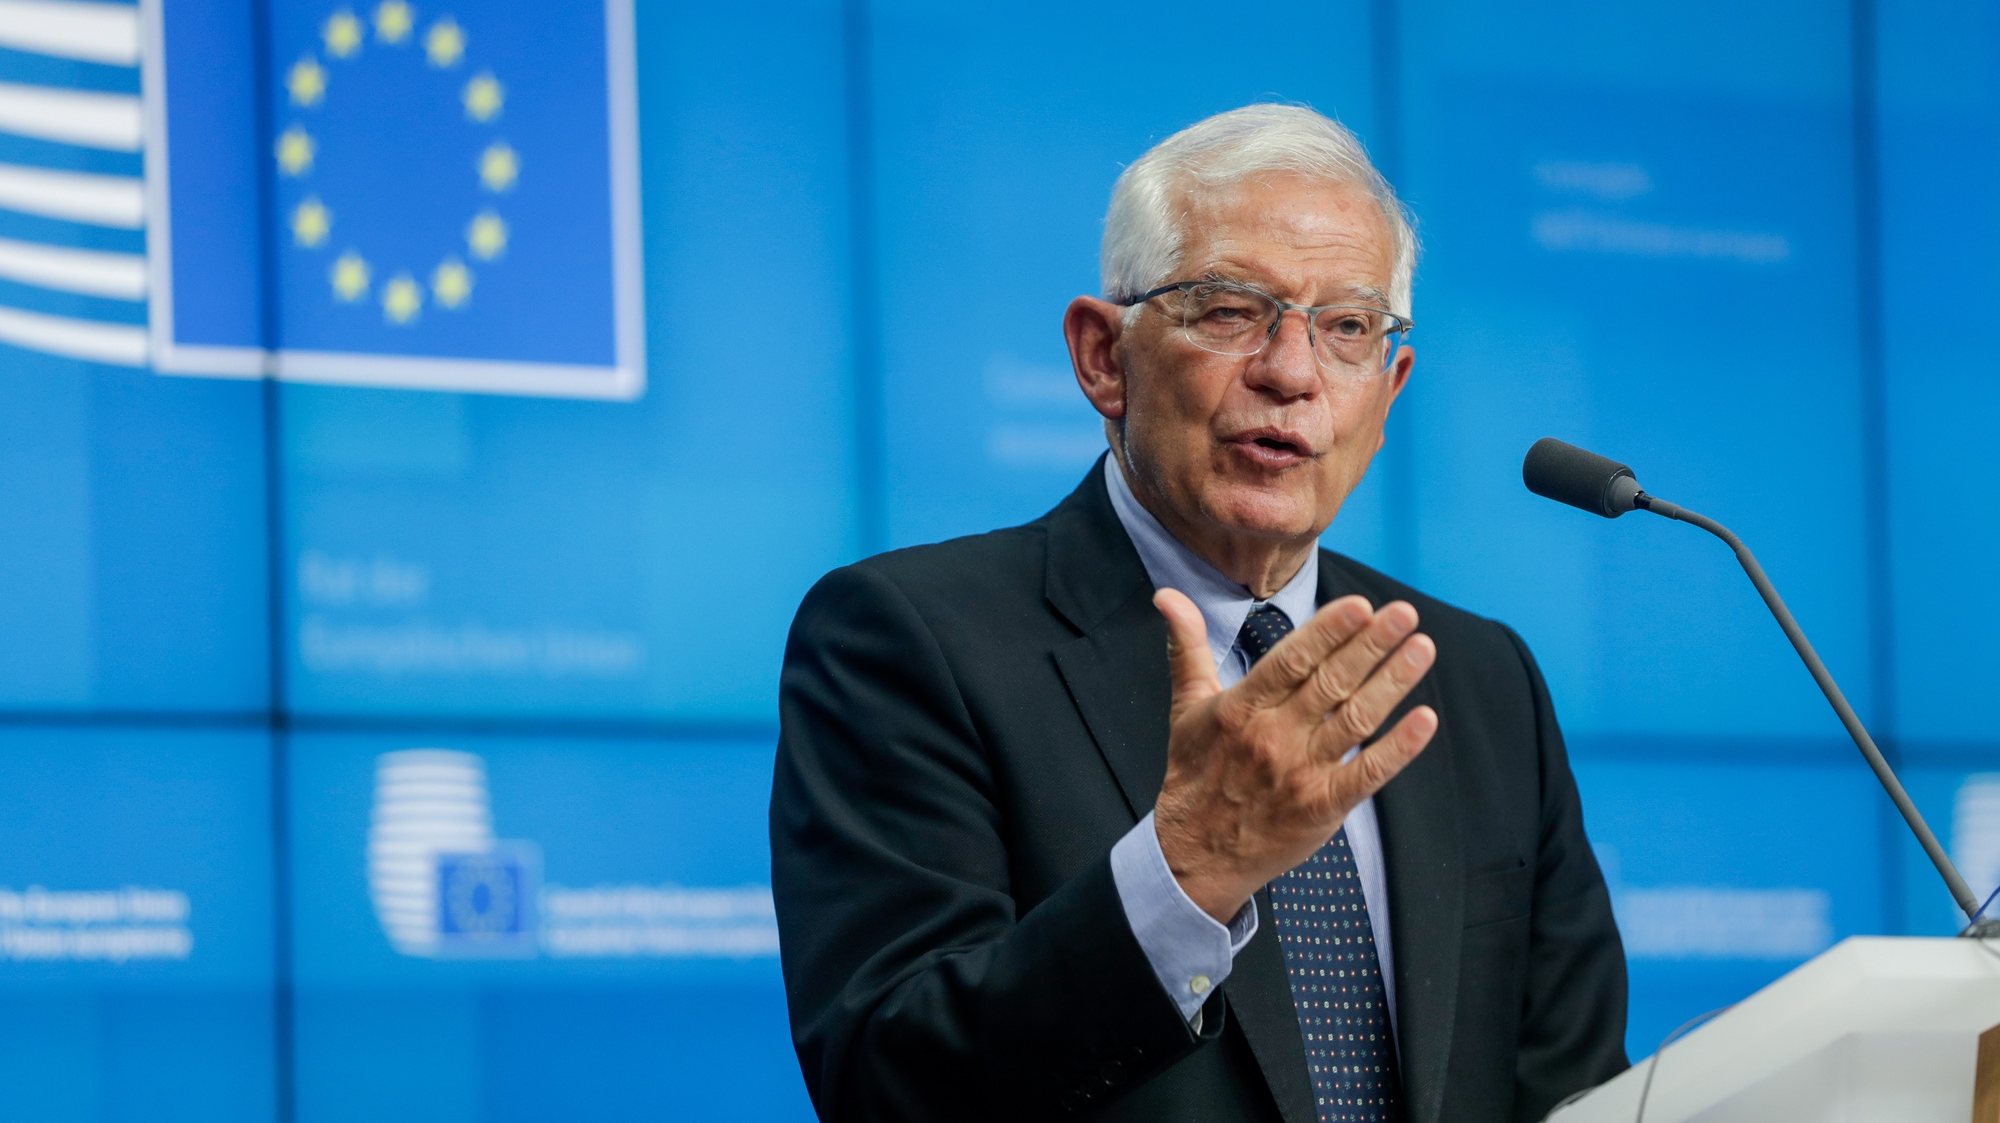 epa09340610 European Union foreign policy chief Josep Borrell gives a press conference at the end of a meeting of the EU foreign ministers, at the European Council in Brussels, Belgium, 12 July 2021.  EPA/STEPHANIE LECOCQ